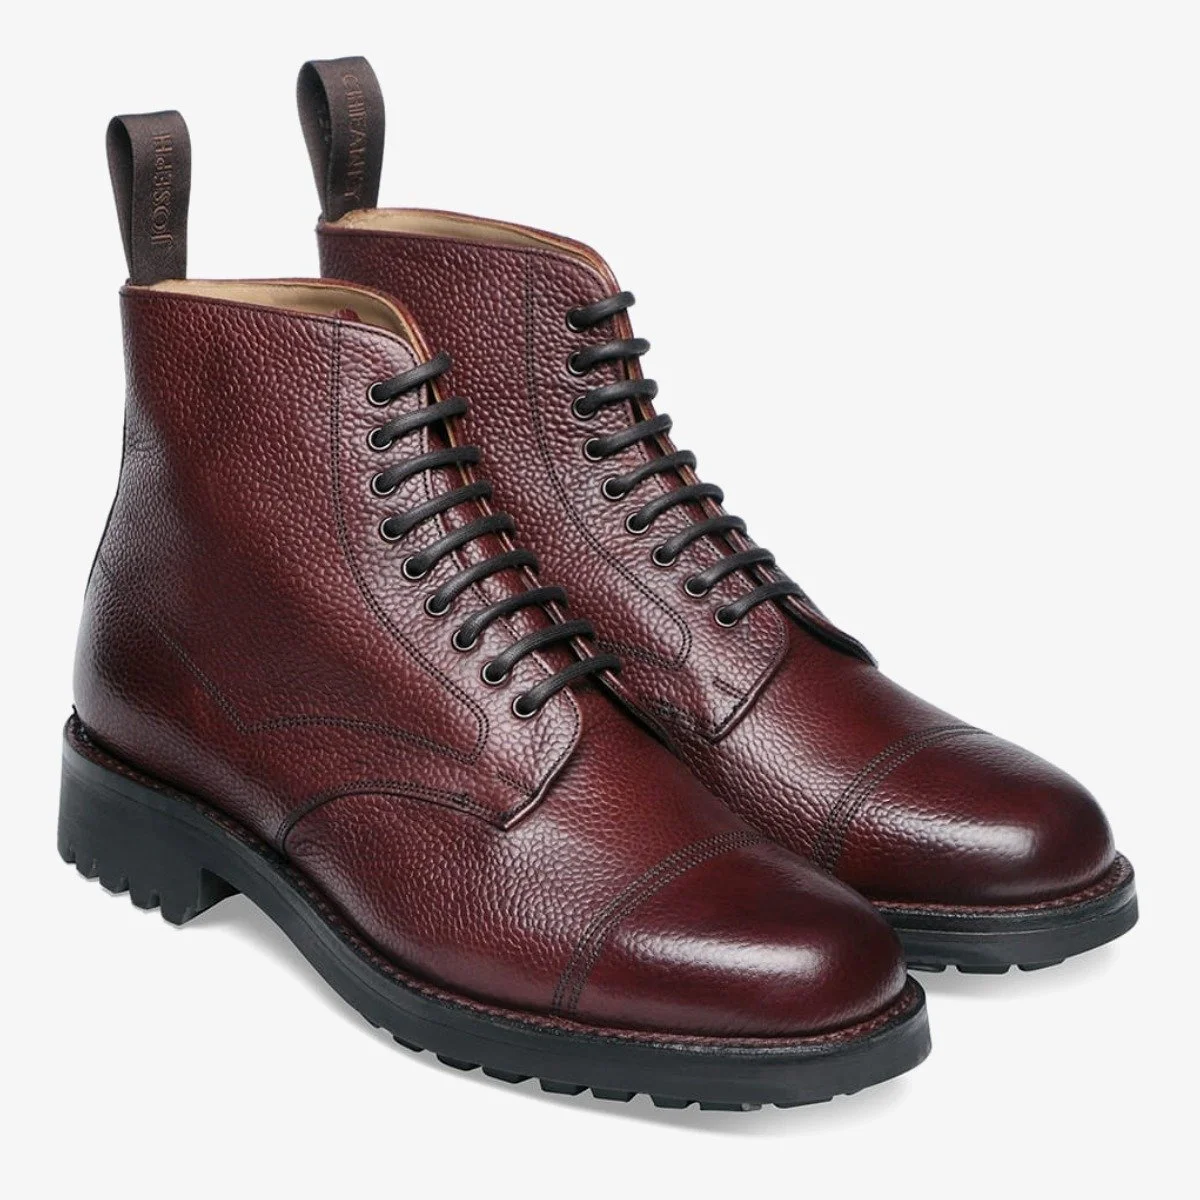 Cheaney Penine II toe cap lace-up boots